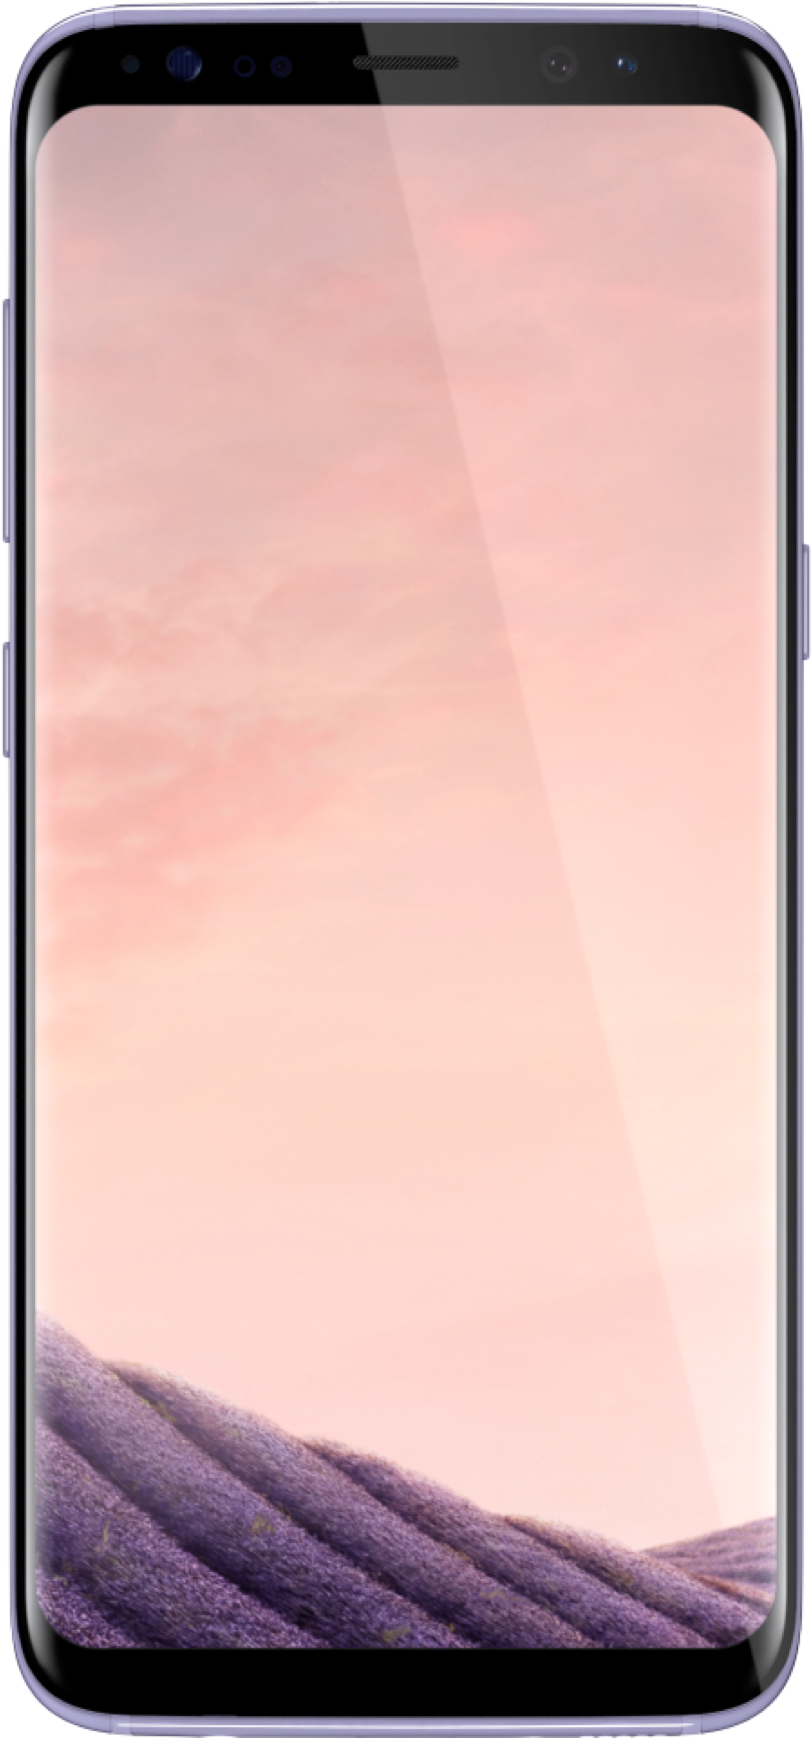 A Cell Phone With A Pink Screen